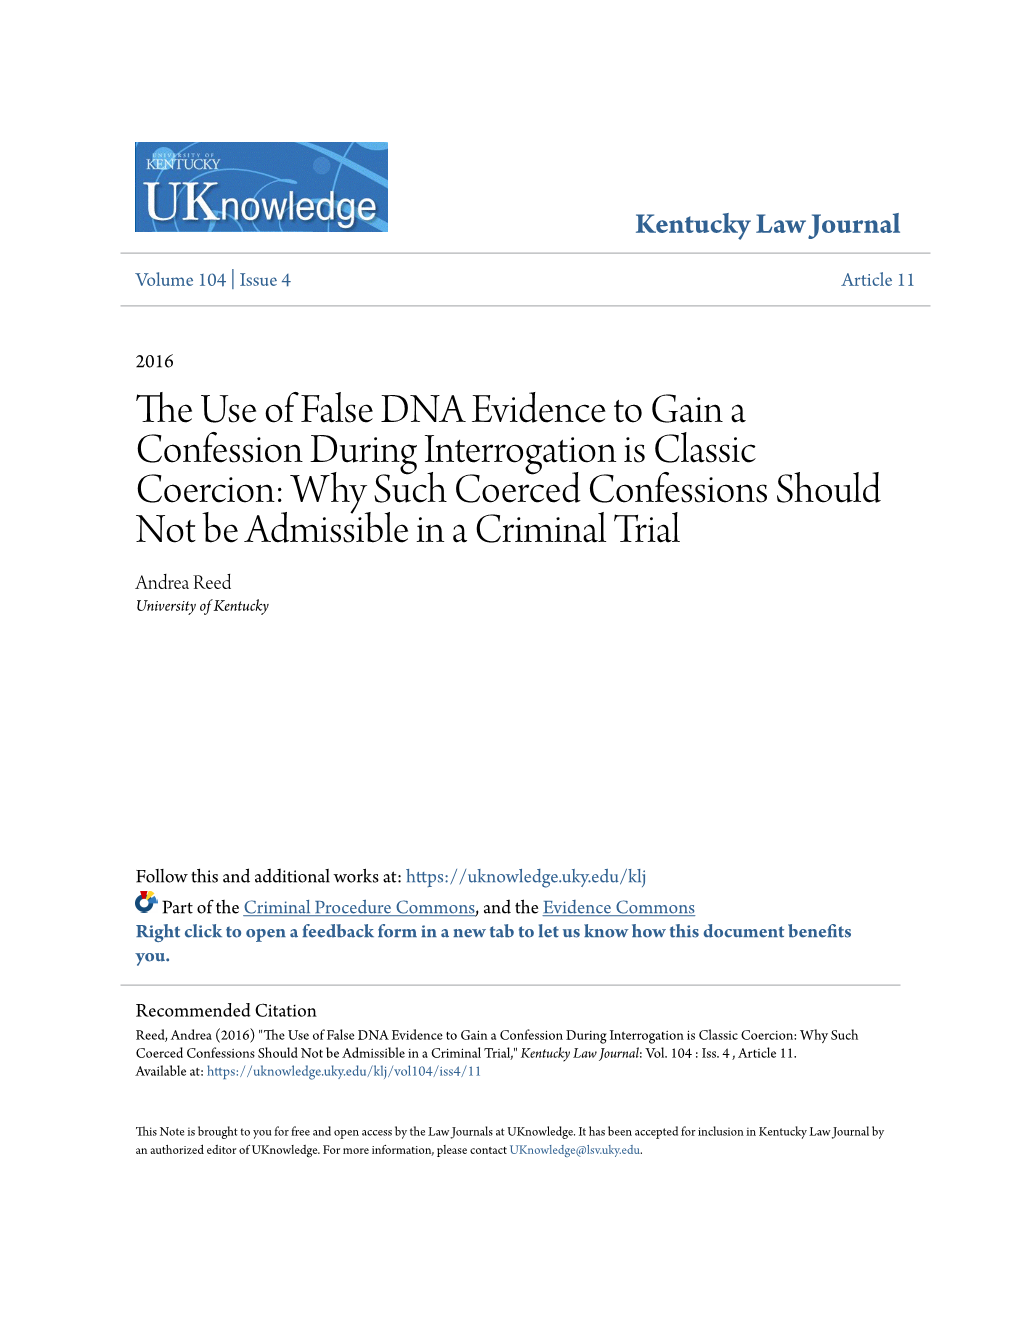 The Use of False DNA Evidence to Gain a Confession During Interrogation Is Classic Coercion: Why Such Coerced Confessions Should Not Be Admissible in a Criminal Trial